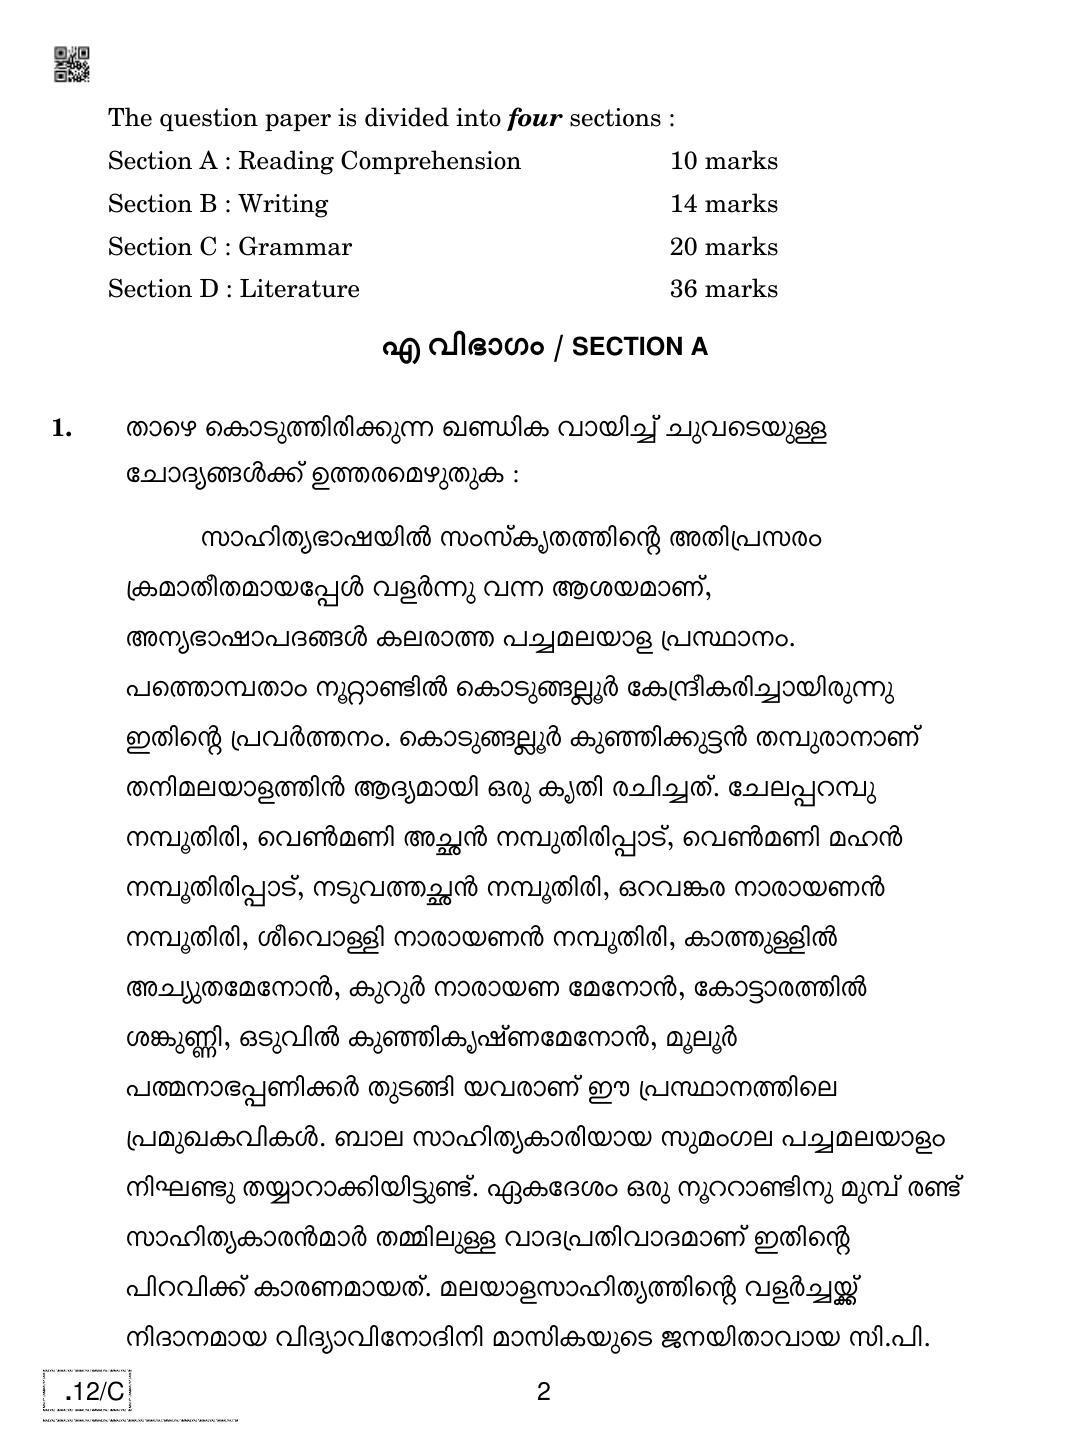 CBSE Class 10 Malayalam 2020 Compartment Question Paper - Page 2